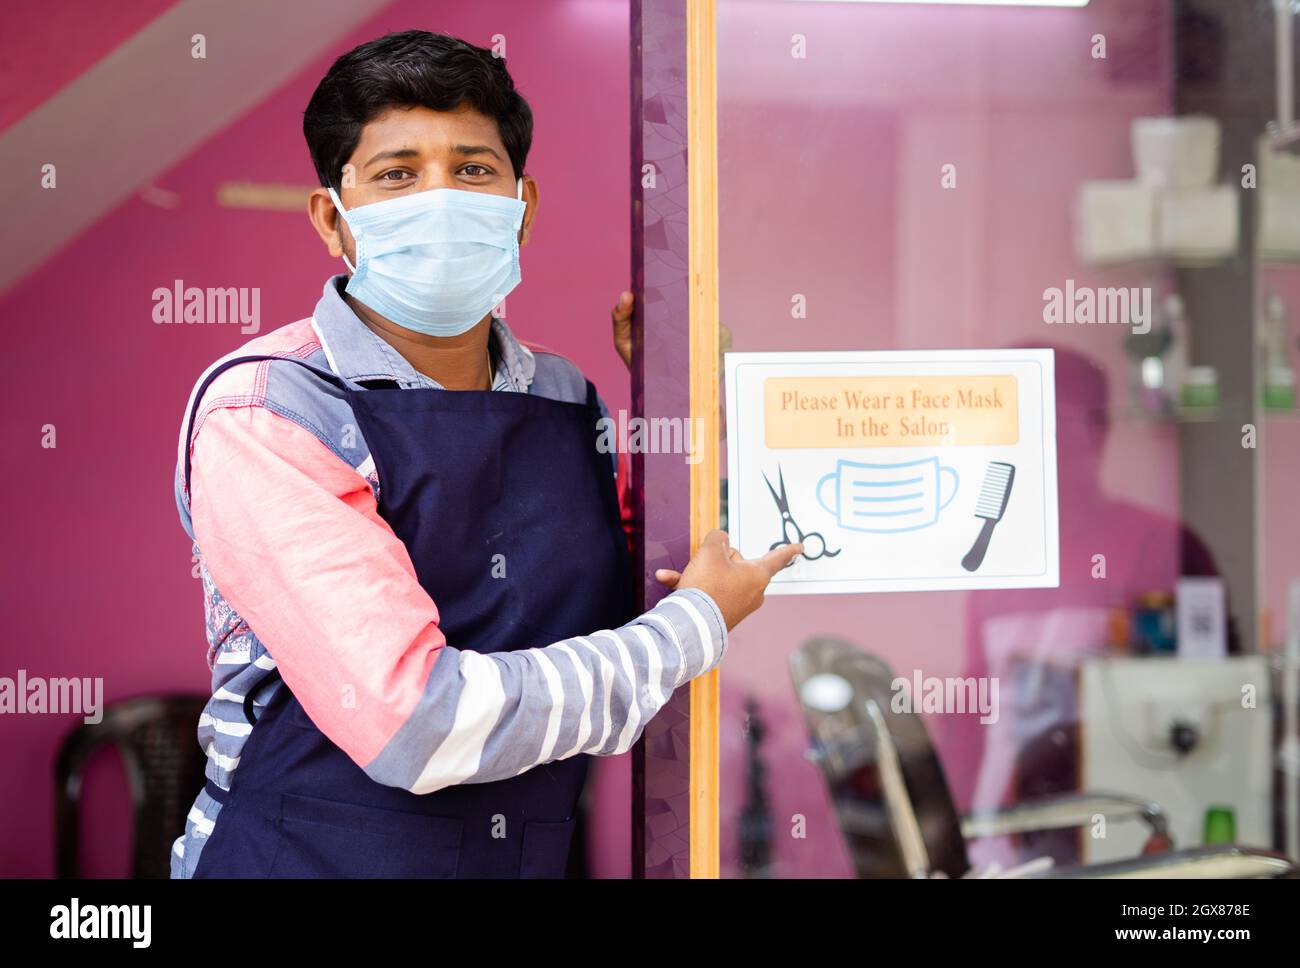 Barber with medical mask showing wear mask at saloon sign board to avoid coronavirus or covid-19 infection as safety measures Stock Photo